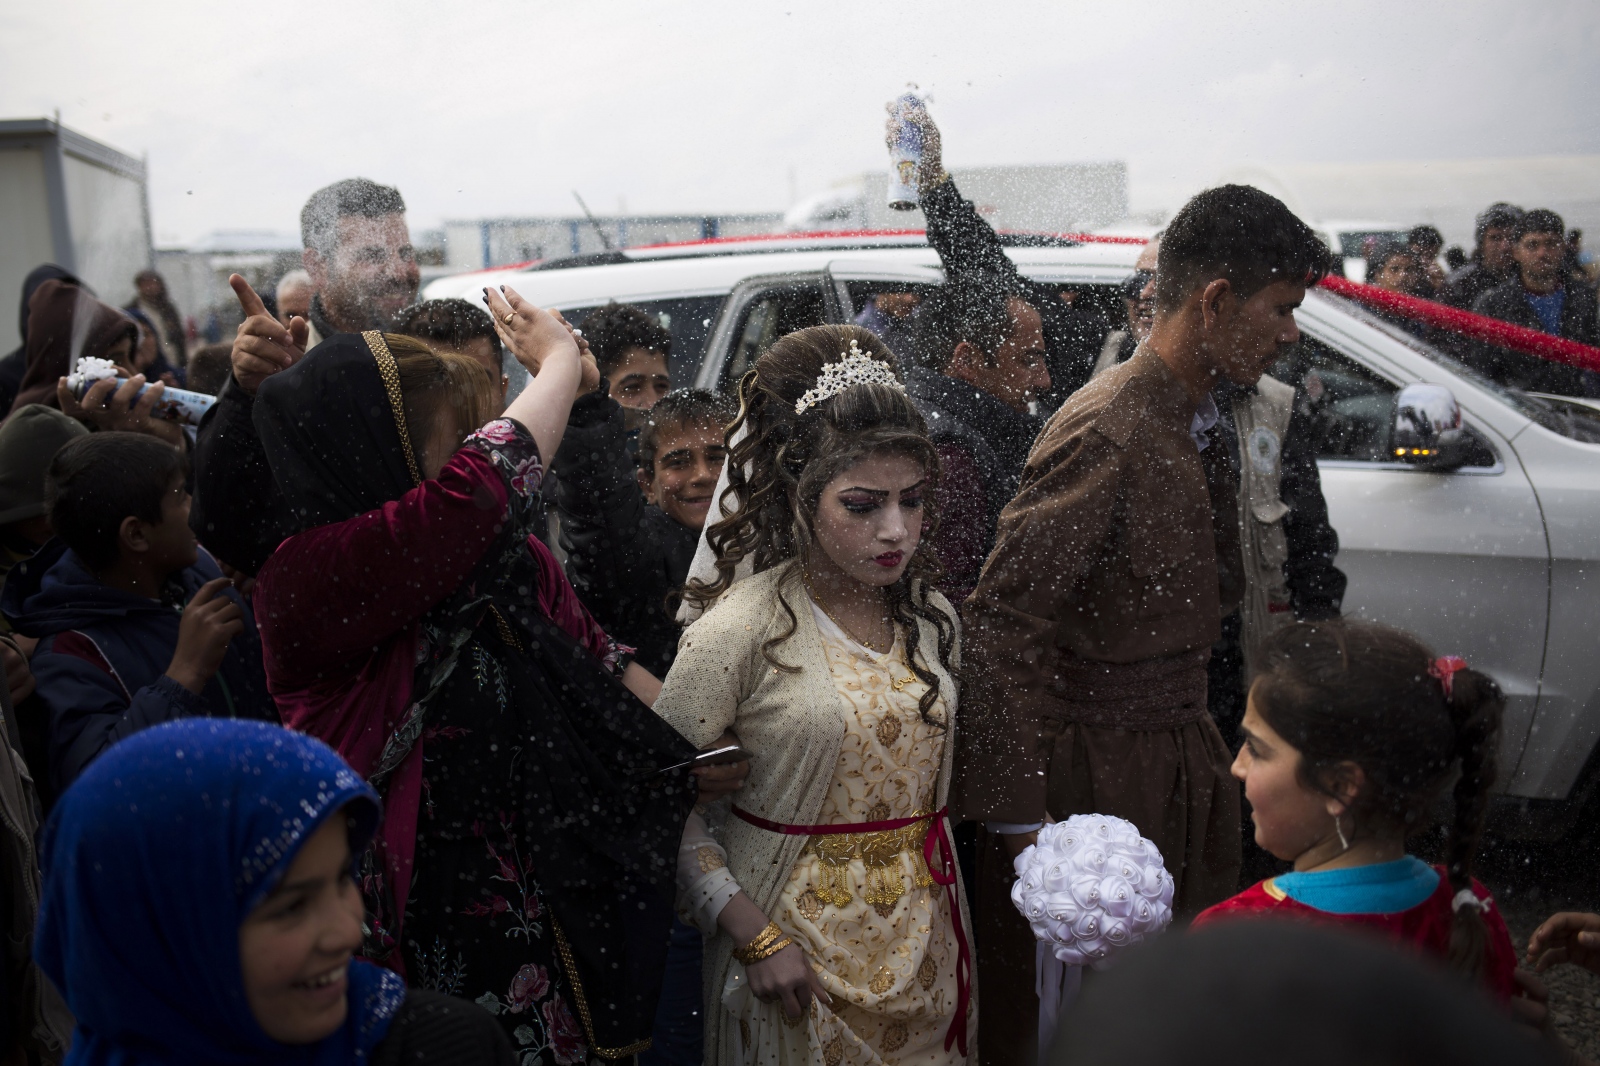 Hussein Zeino Danoon (25) and &nbsp;Shahad Ahmed Abed (16) arrive at the Khazer camp for displaced from Mosul for their wedding. The legal age for marriage in Iraq is 18, or 15 with parental permission. The two celebrated their wedding less than a month after fleeing the fighting in Mosul.